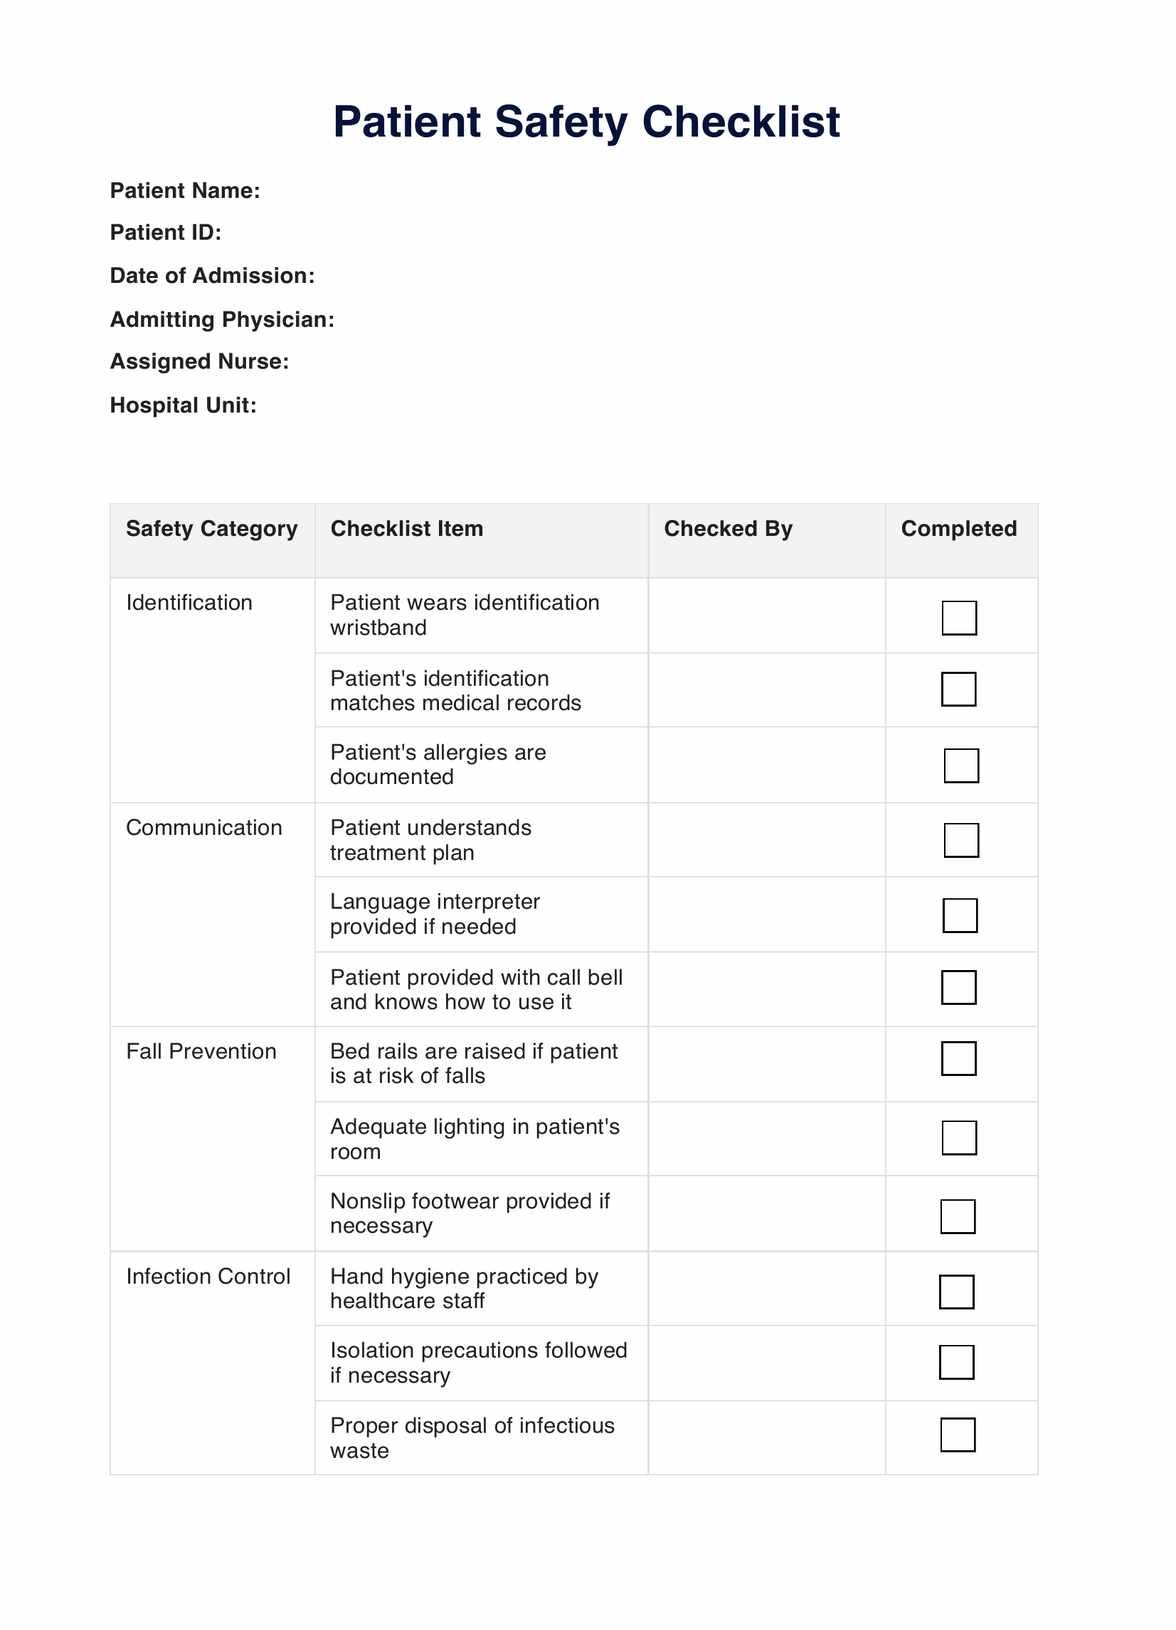 Patient Safety Checklist PDF Example